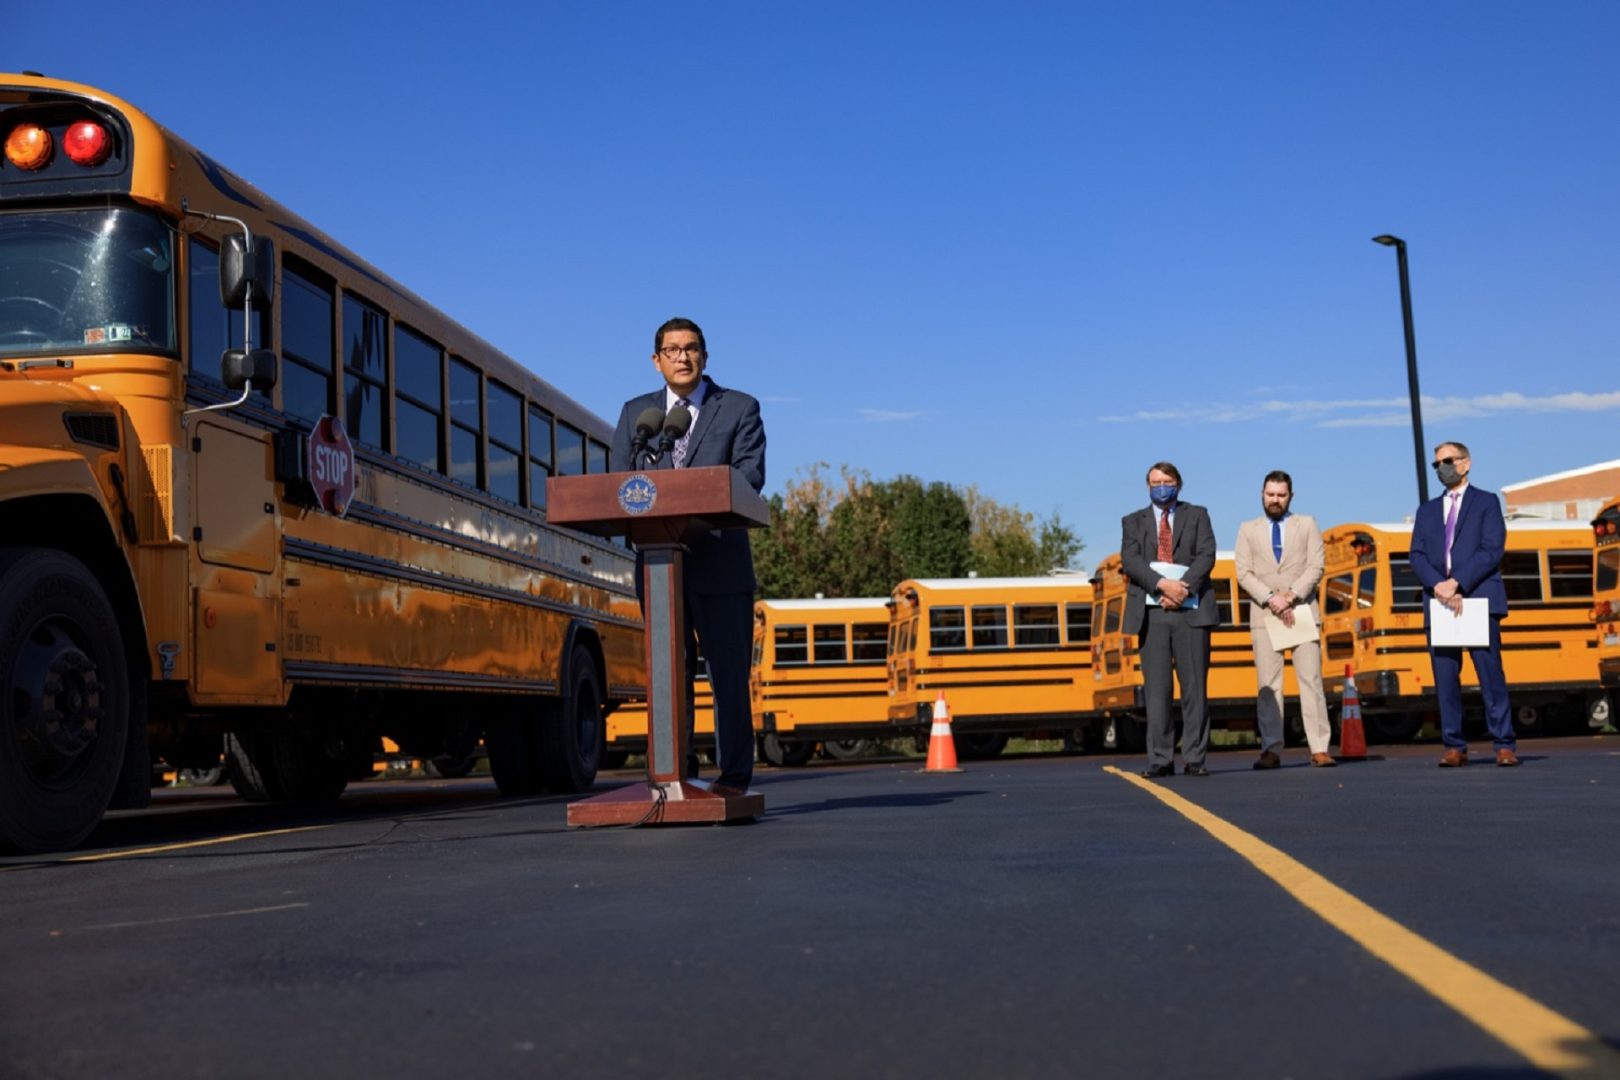 Pennsylvania Department of Education (PDE) Secretary Dr. Noe Ortega speaks during a press conference, which encouraged interested individuals to obtain Commercial Driver’s License to address bus driver shortage in Pennsylvania, on Thursday, October 21, 2021.